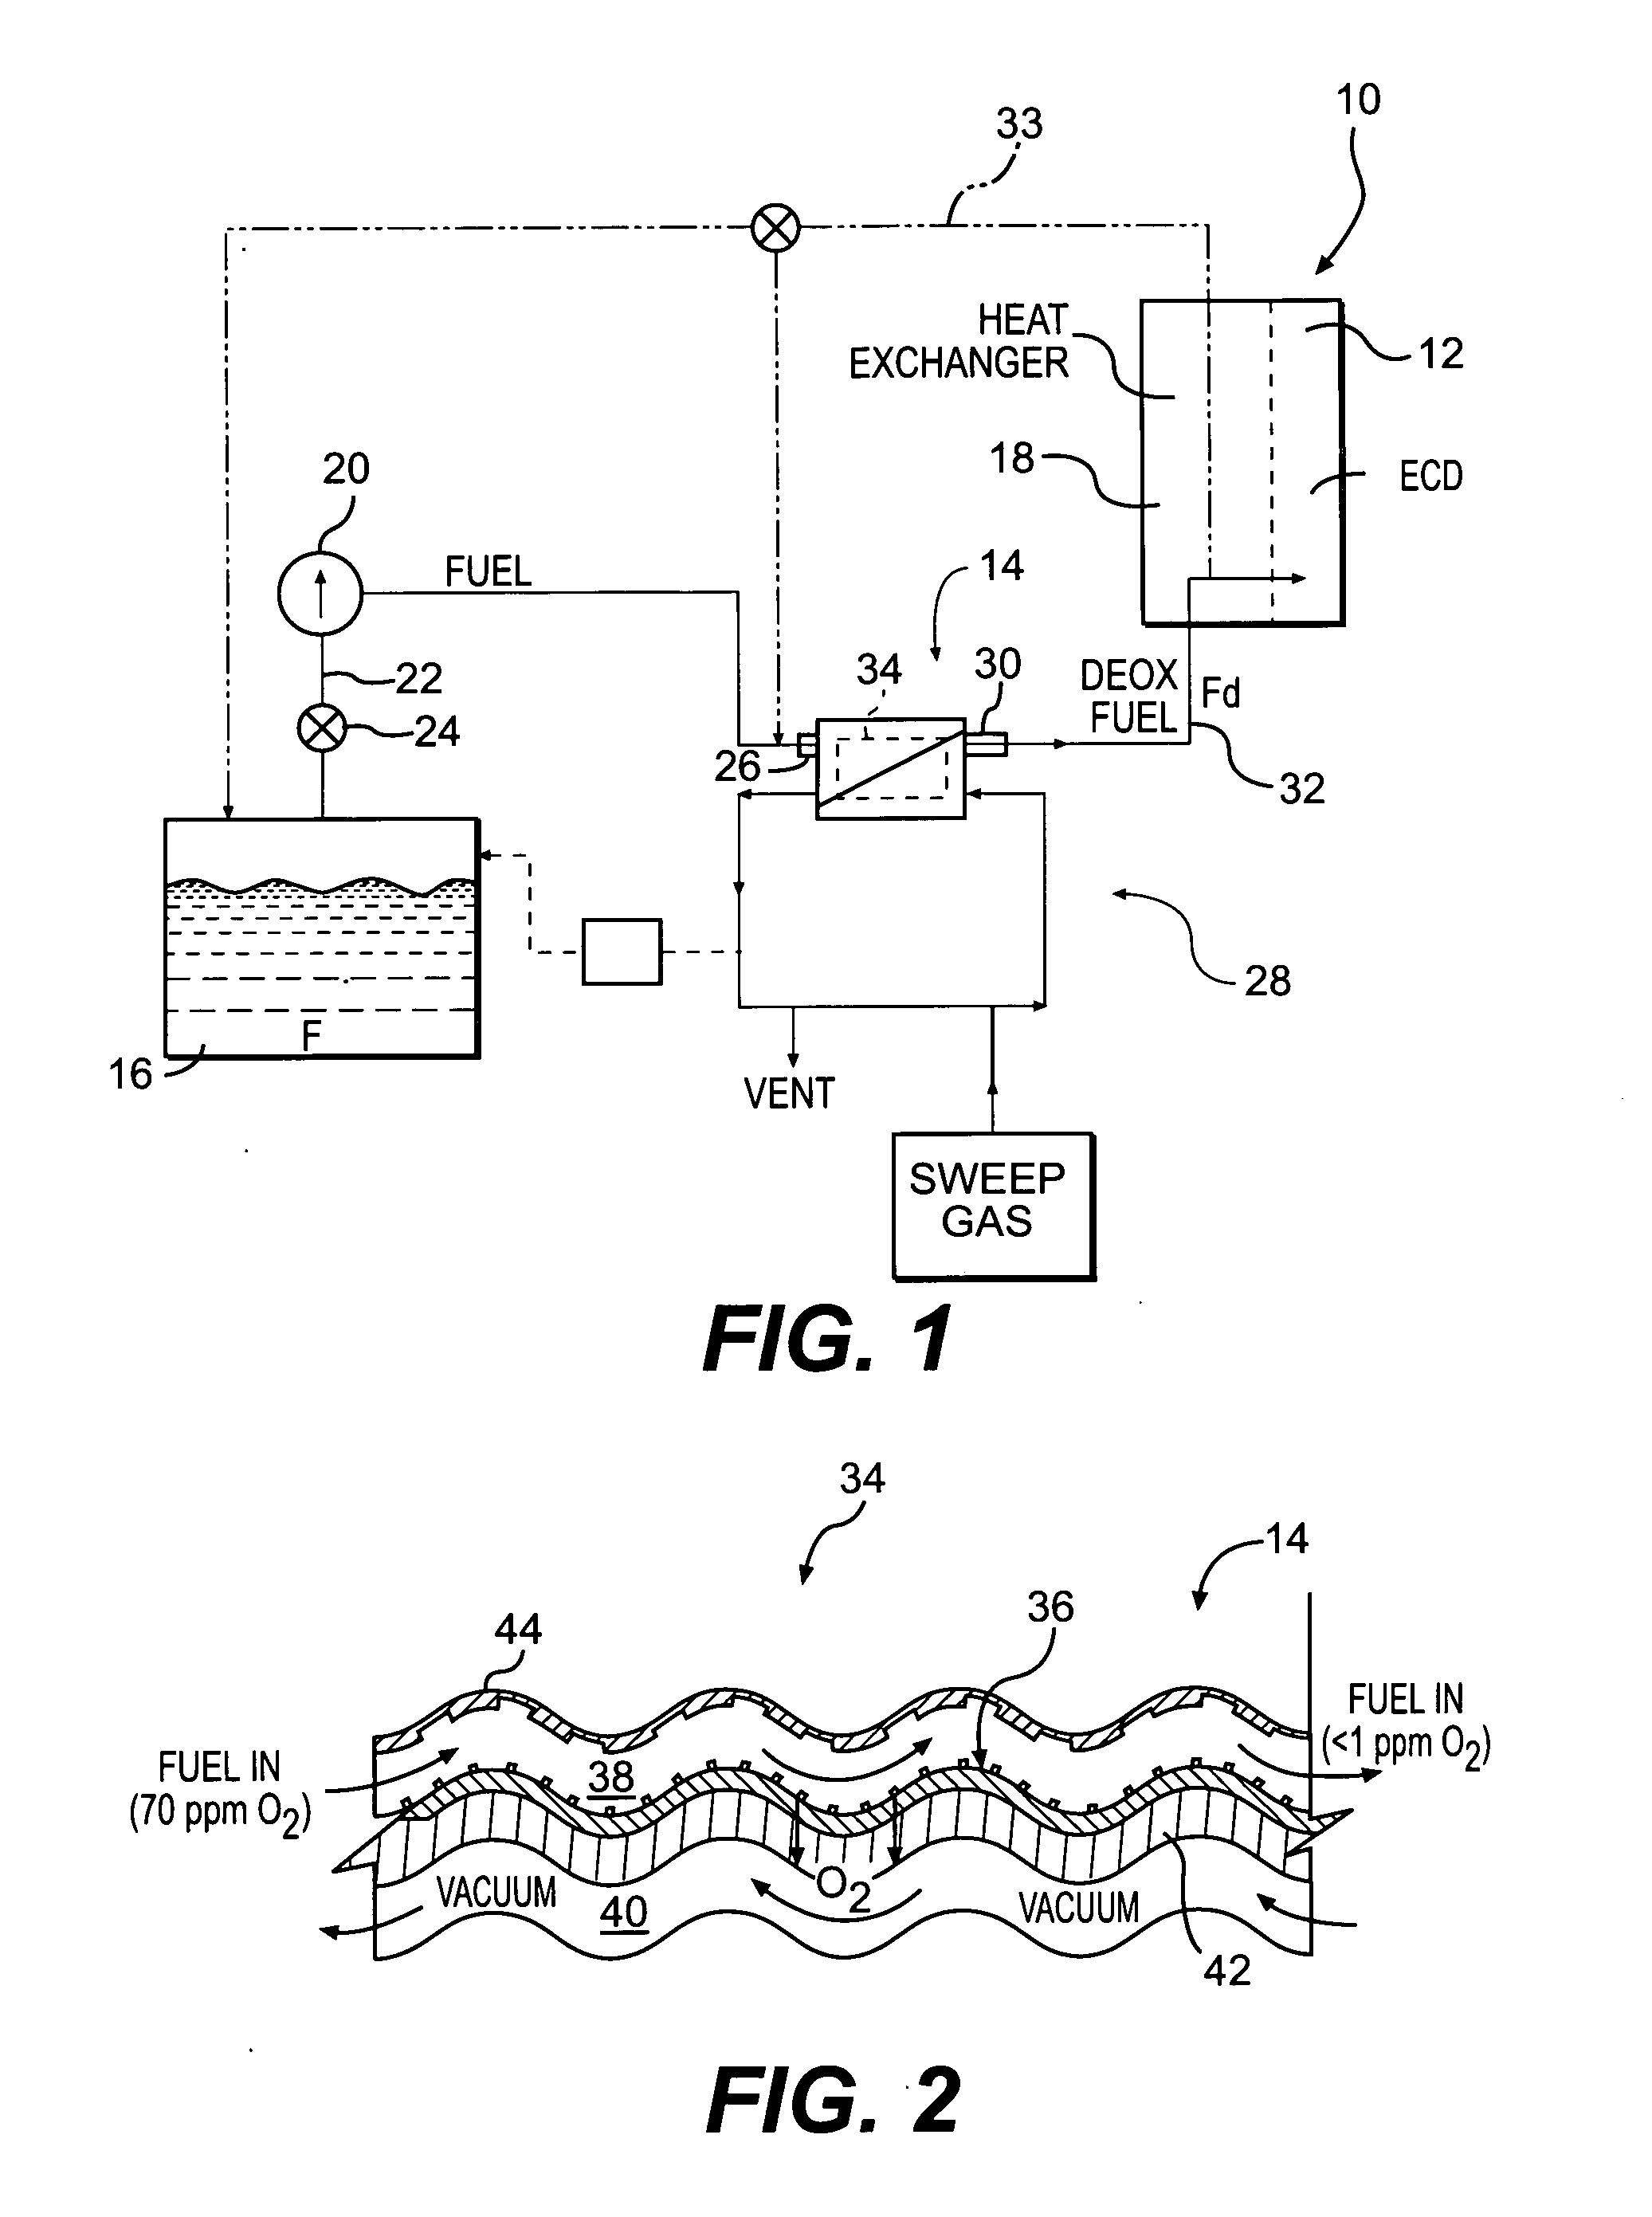 Fuel deoxygenation system with non-planar plate members